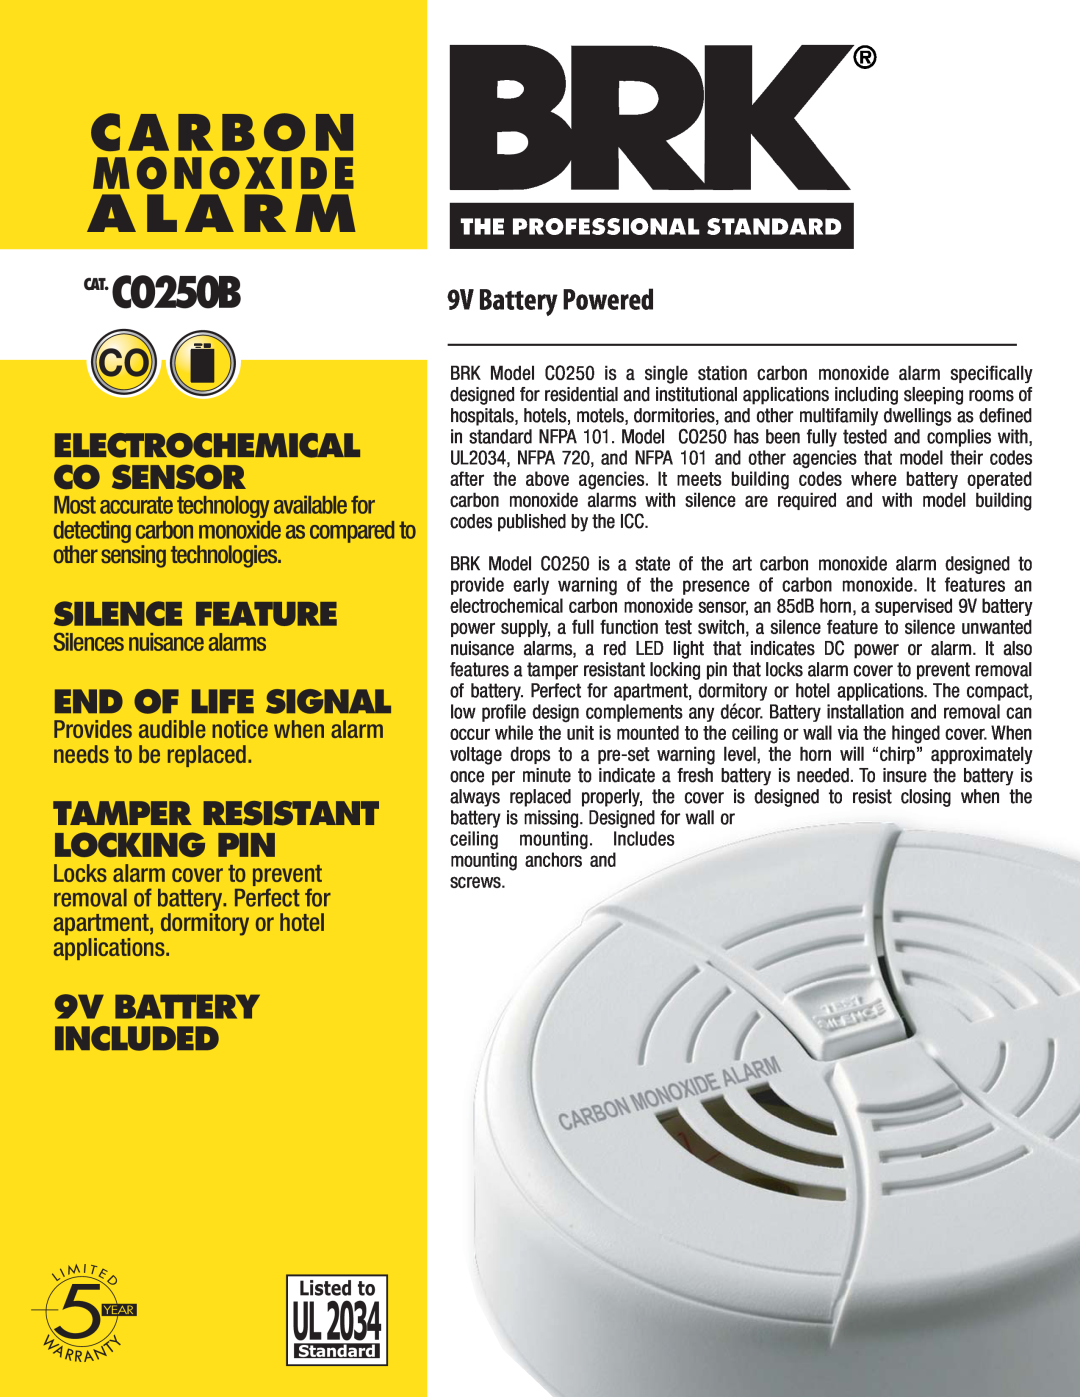 BRK electronic manual Alarm, Carbon, Monoxide, CAT.CO250B, Silence Feature, End Of Life Signal, 9V BATTERY INCLUDED 